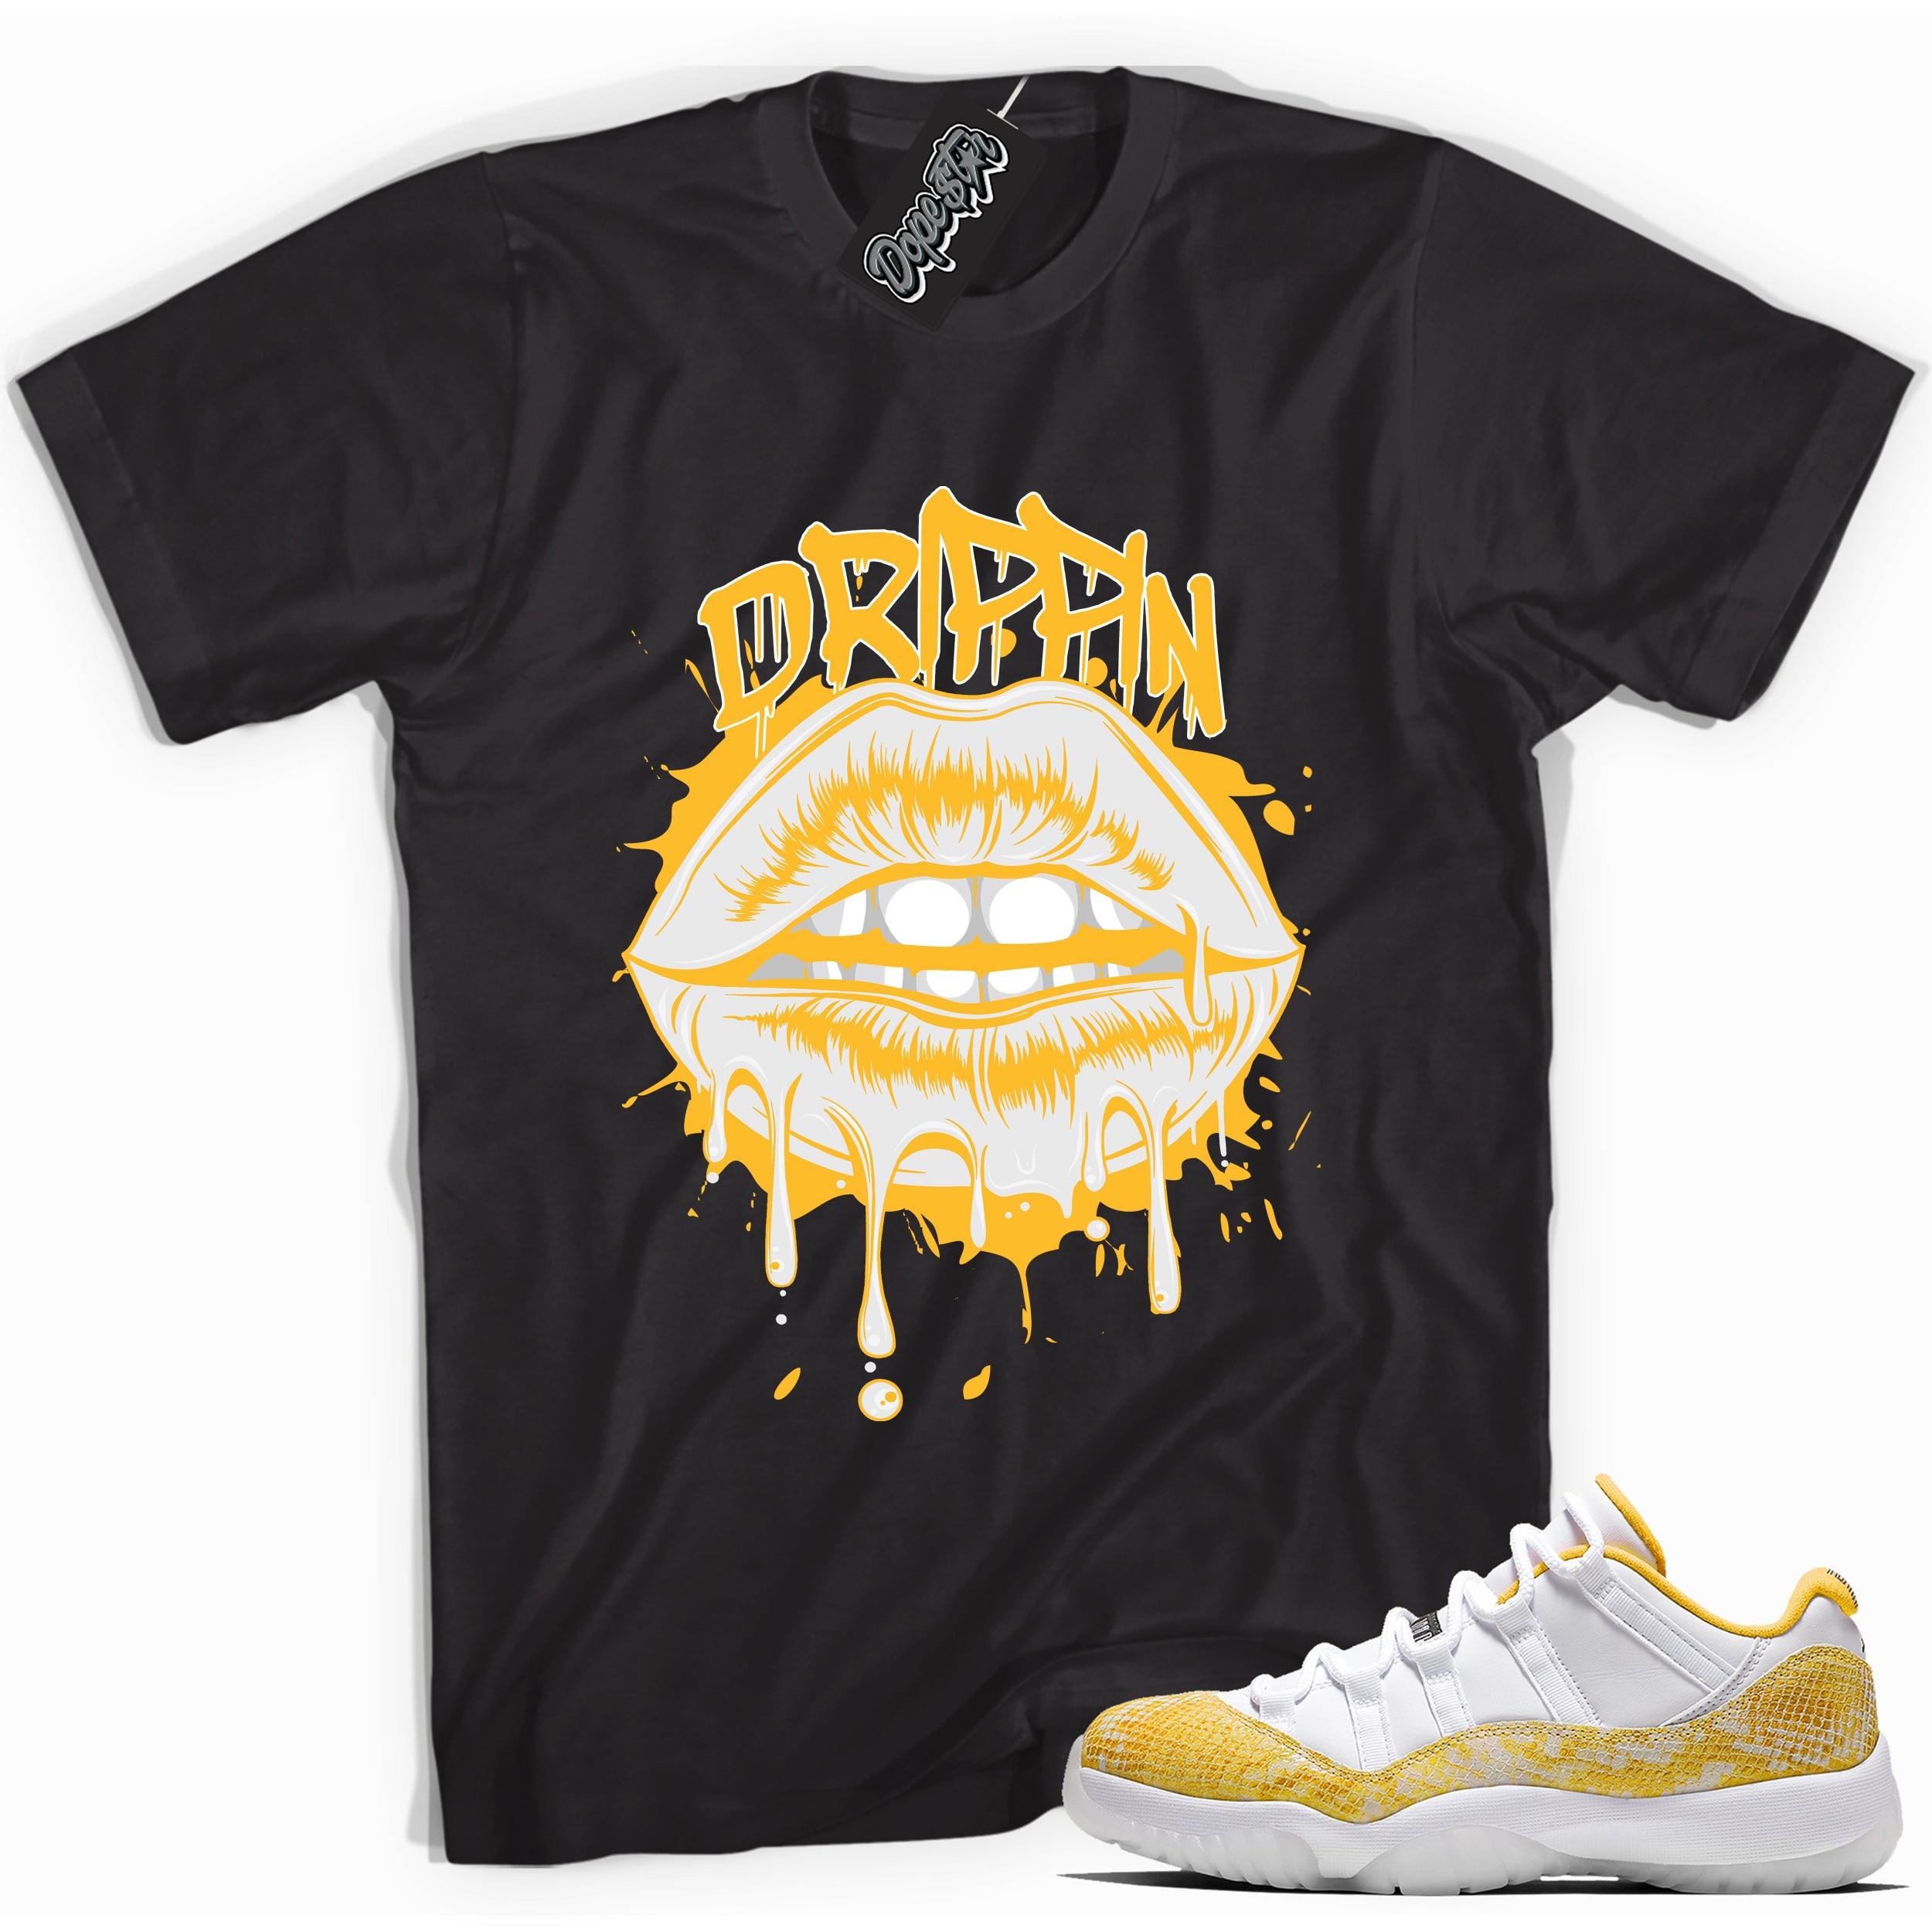 Cool black graphic tee with 'drippin' print, that perfectly matches  Air Jordan 11 Low Yellow Snakeskin sneakers